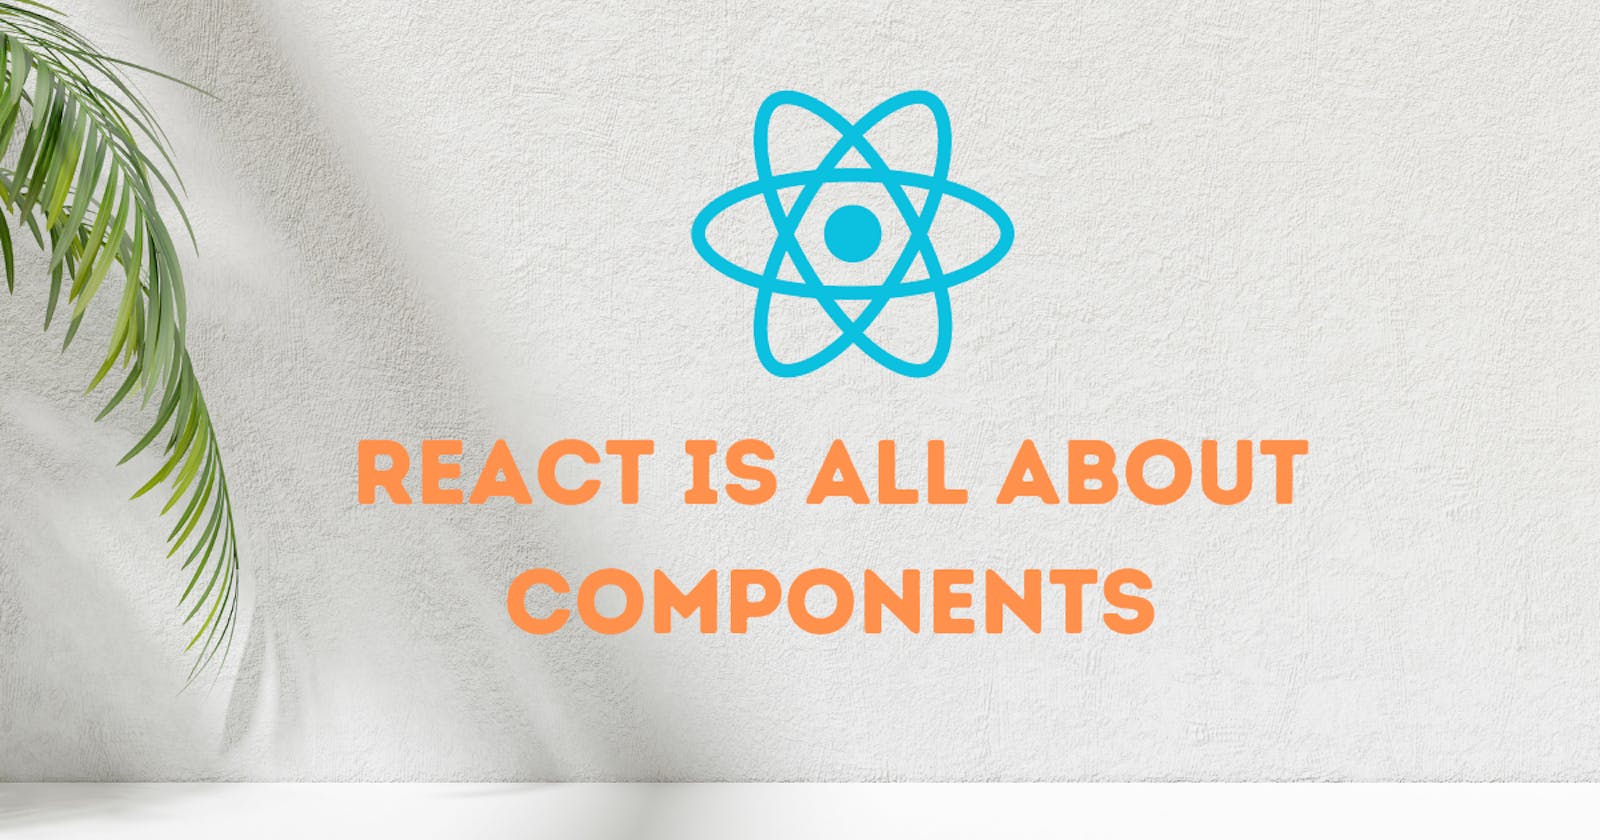 React is all about components